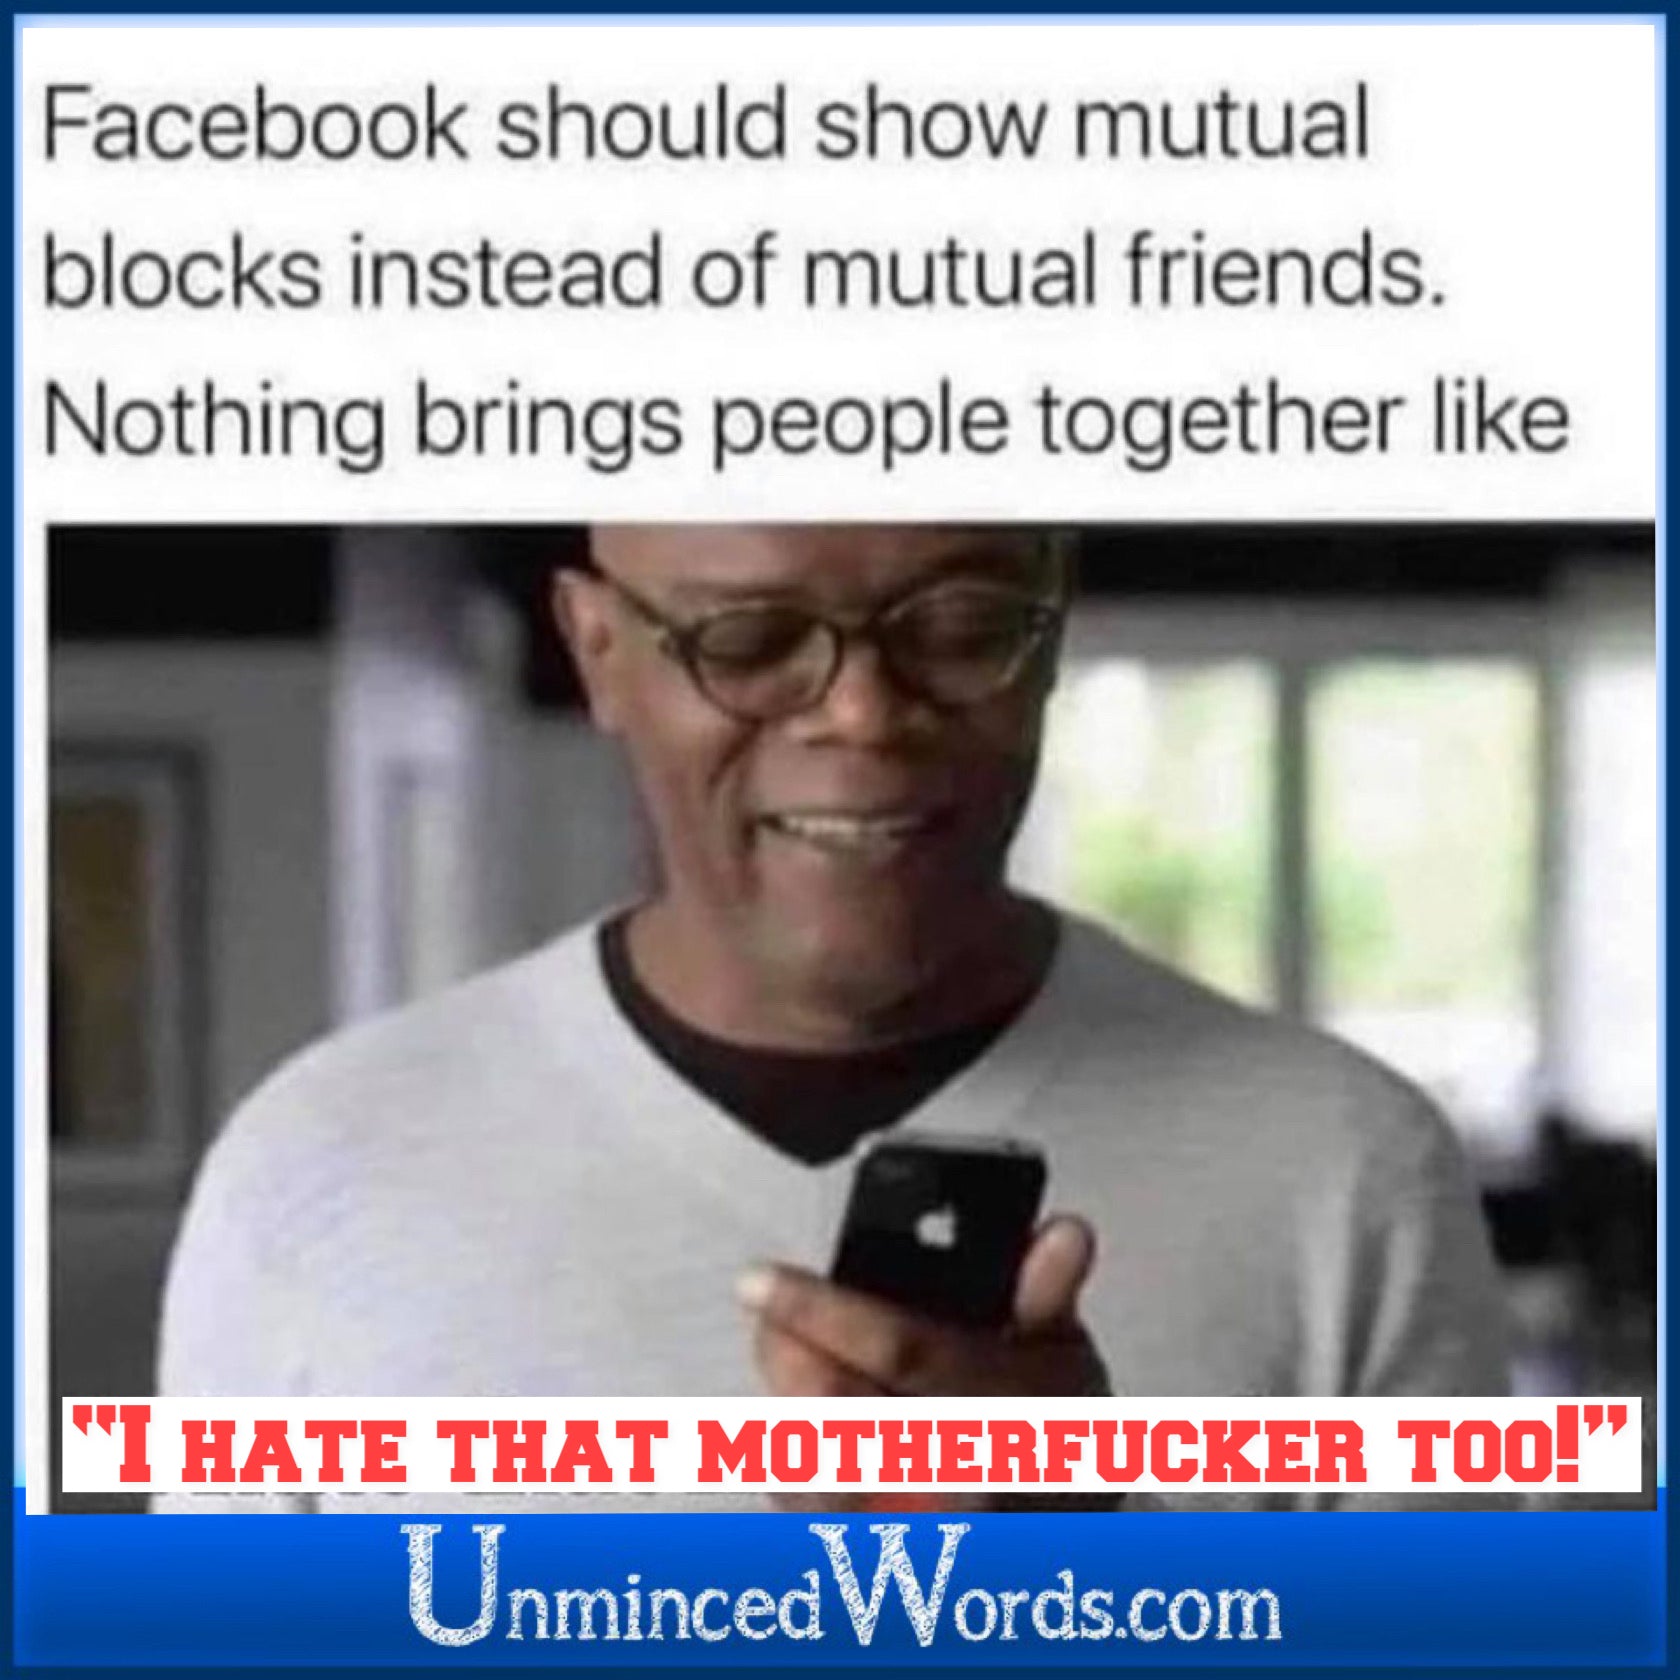 Facebook should show mutual blocks is the meme we can agree on.